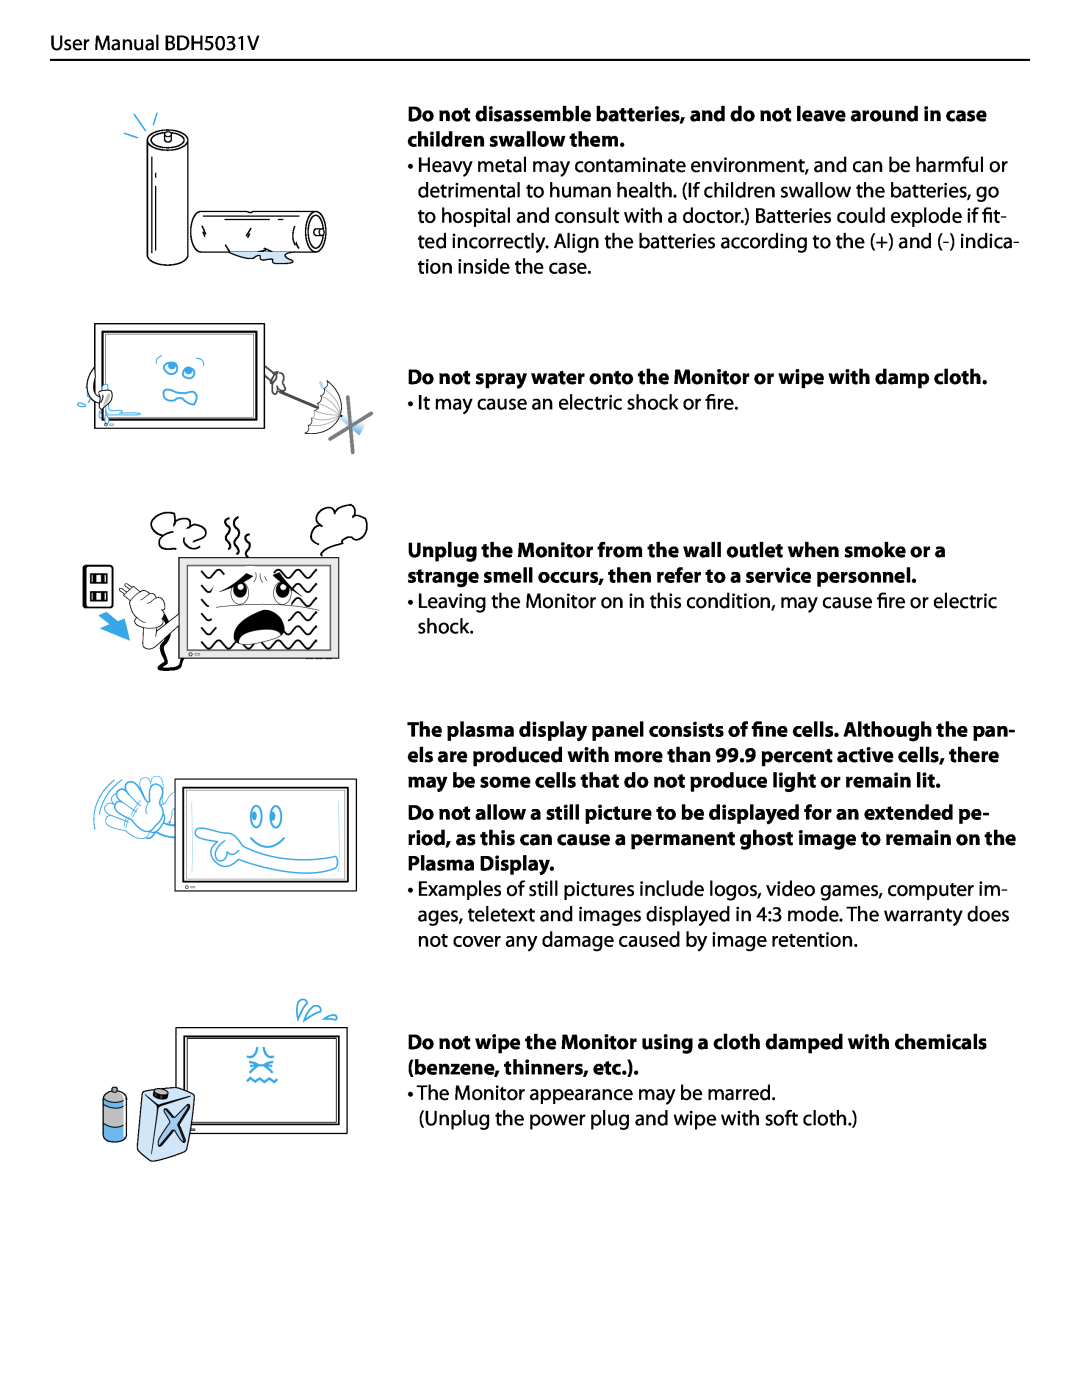 Philips BDH5031V.00 user manual Do not spray water onto the Monitor or wipe with damp cloth 